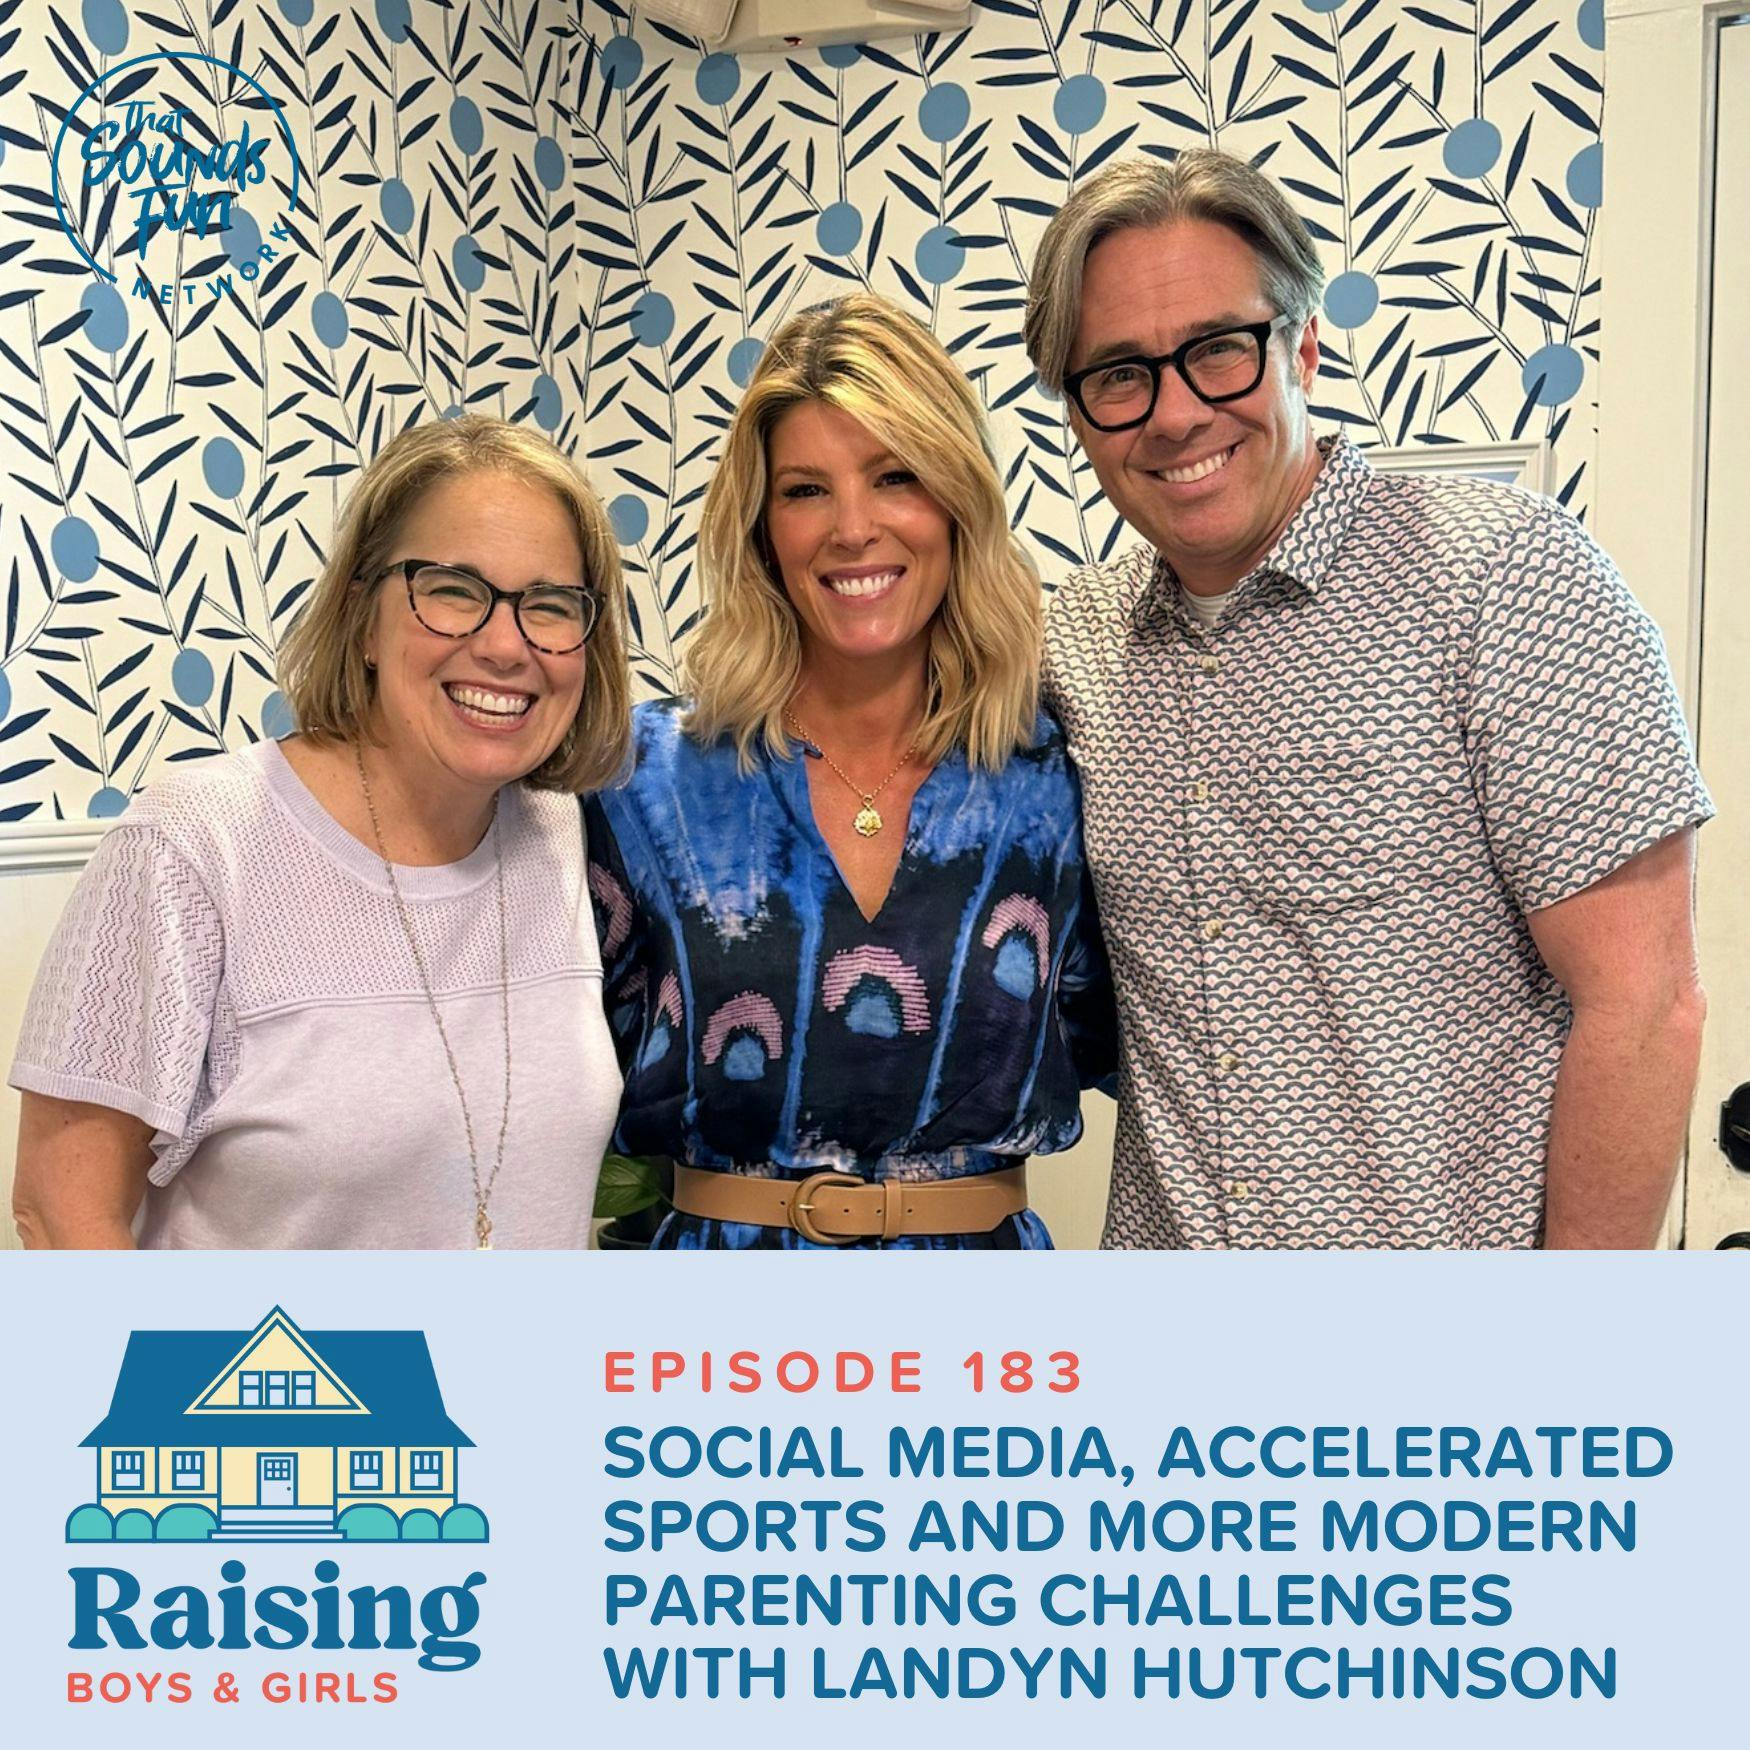 Episode 183: Social Media, Accelerated Sports and More Modern Parenting Challenges with Landyn Hutchinson